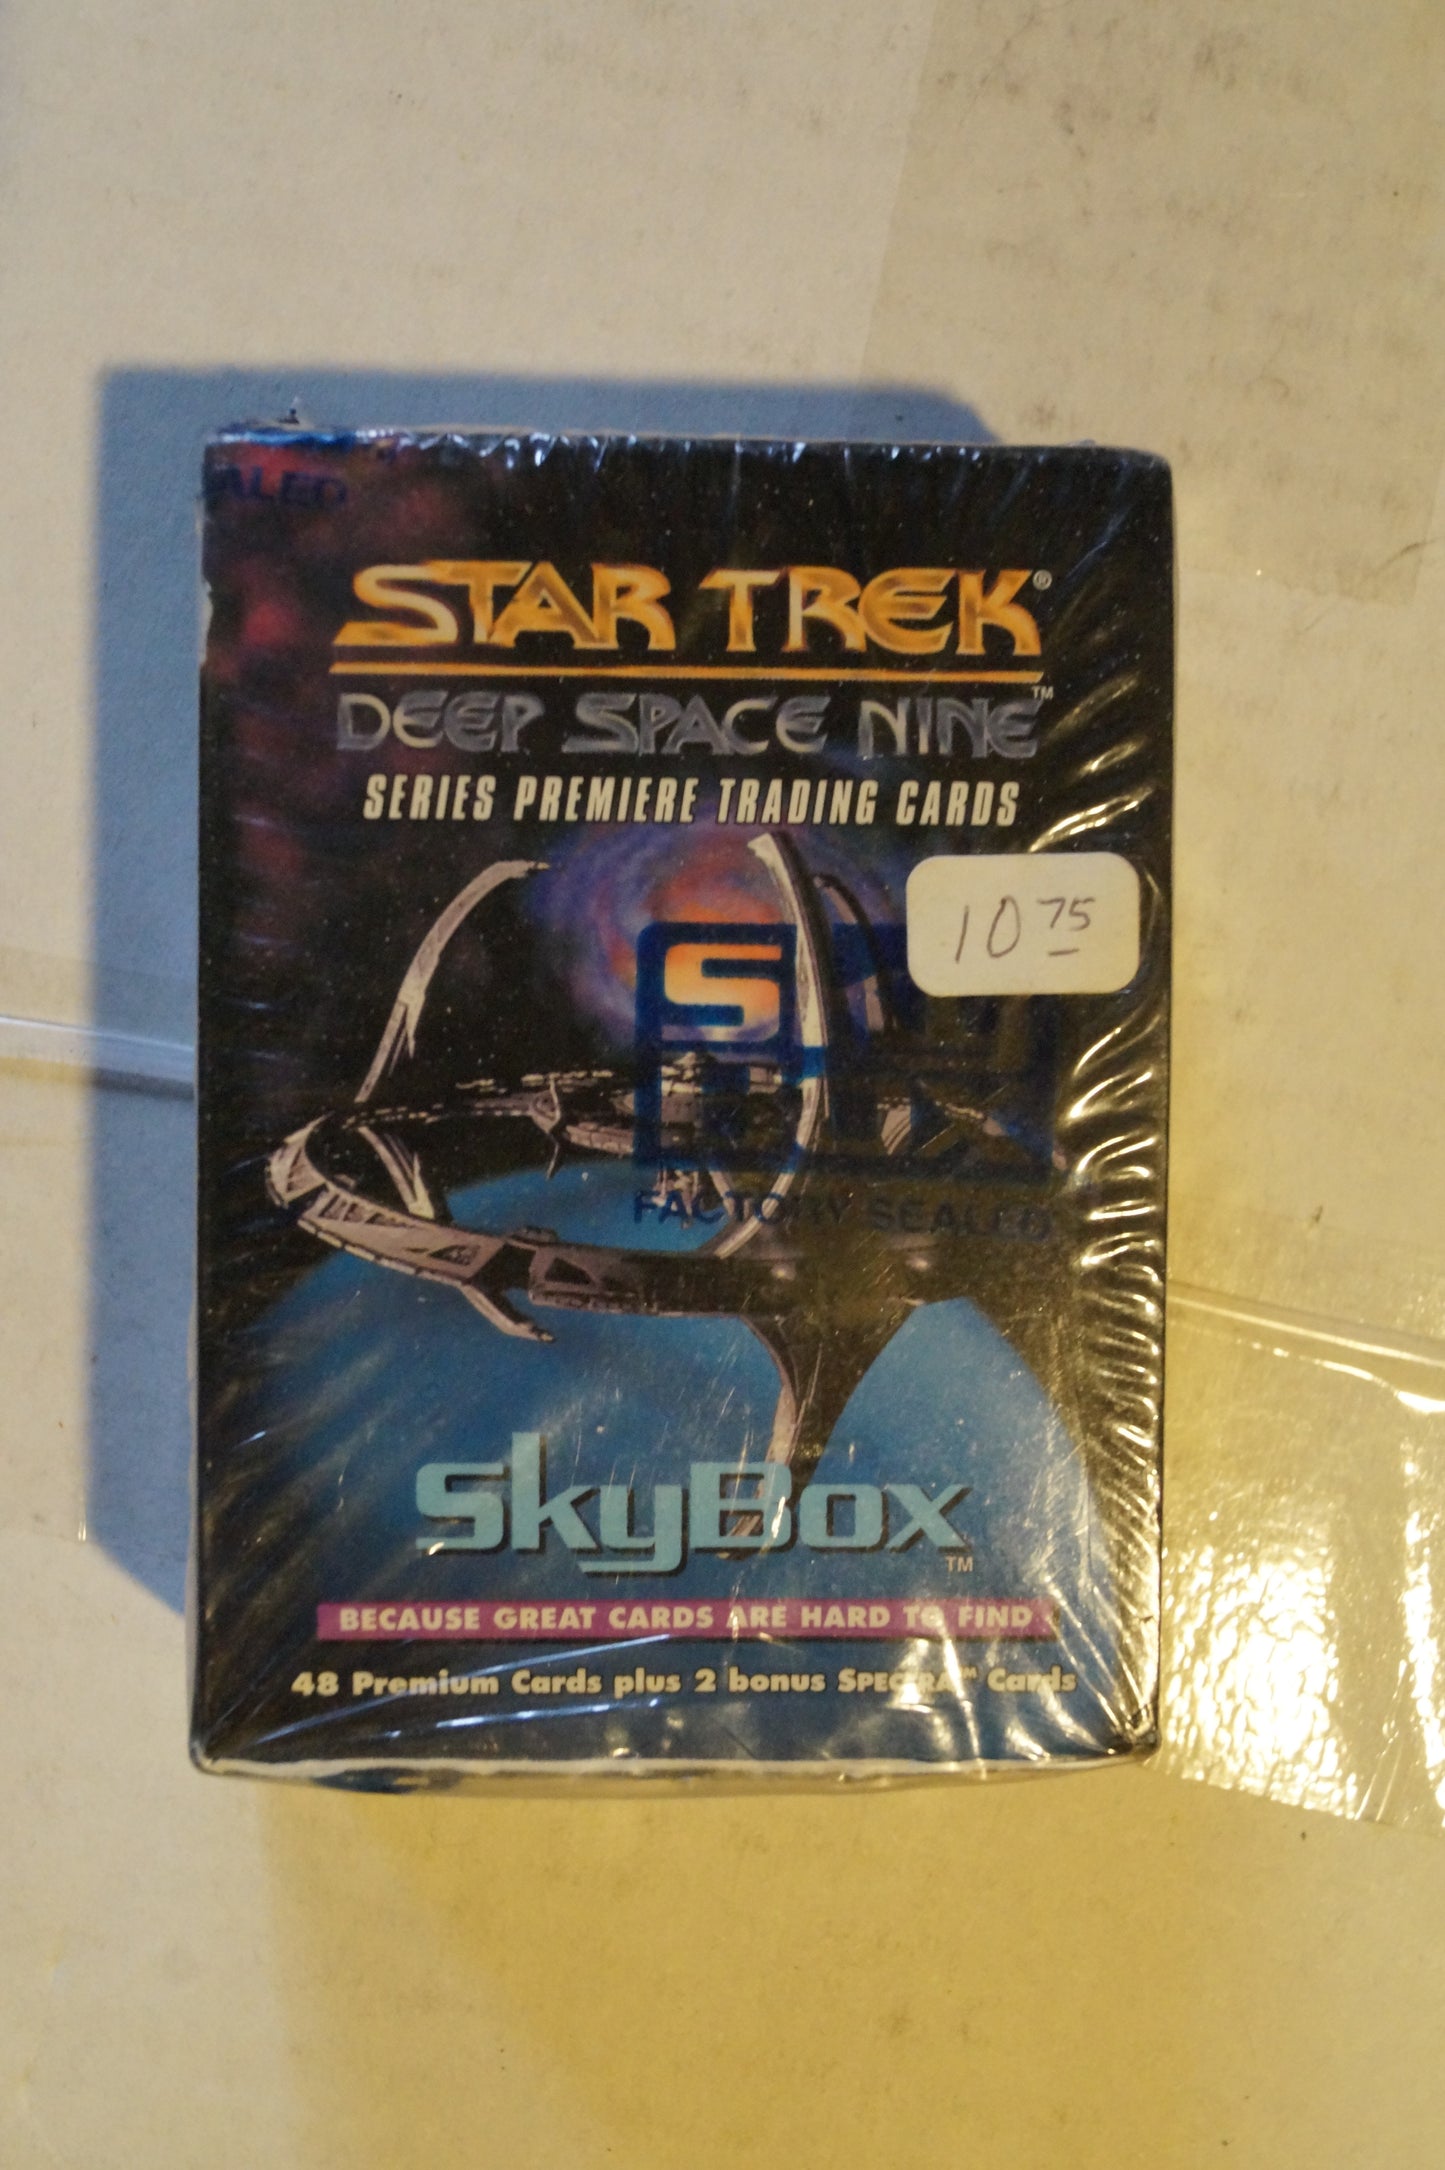 Deep Space 9 Collector Cards Premiere Series Unopened Box